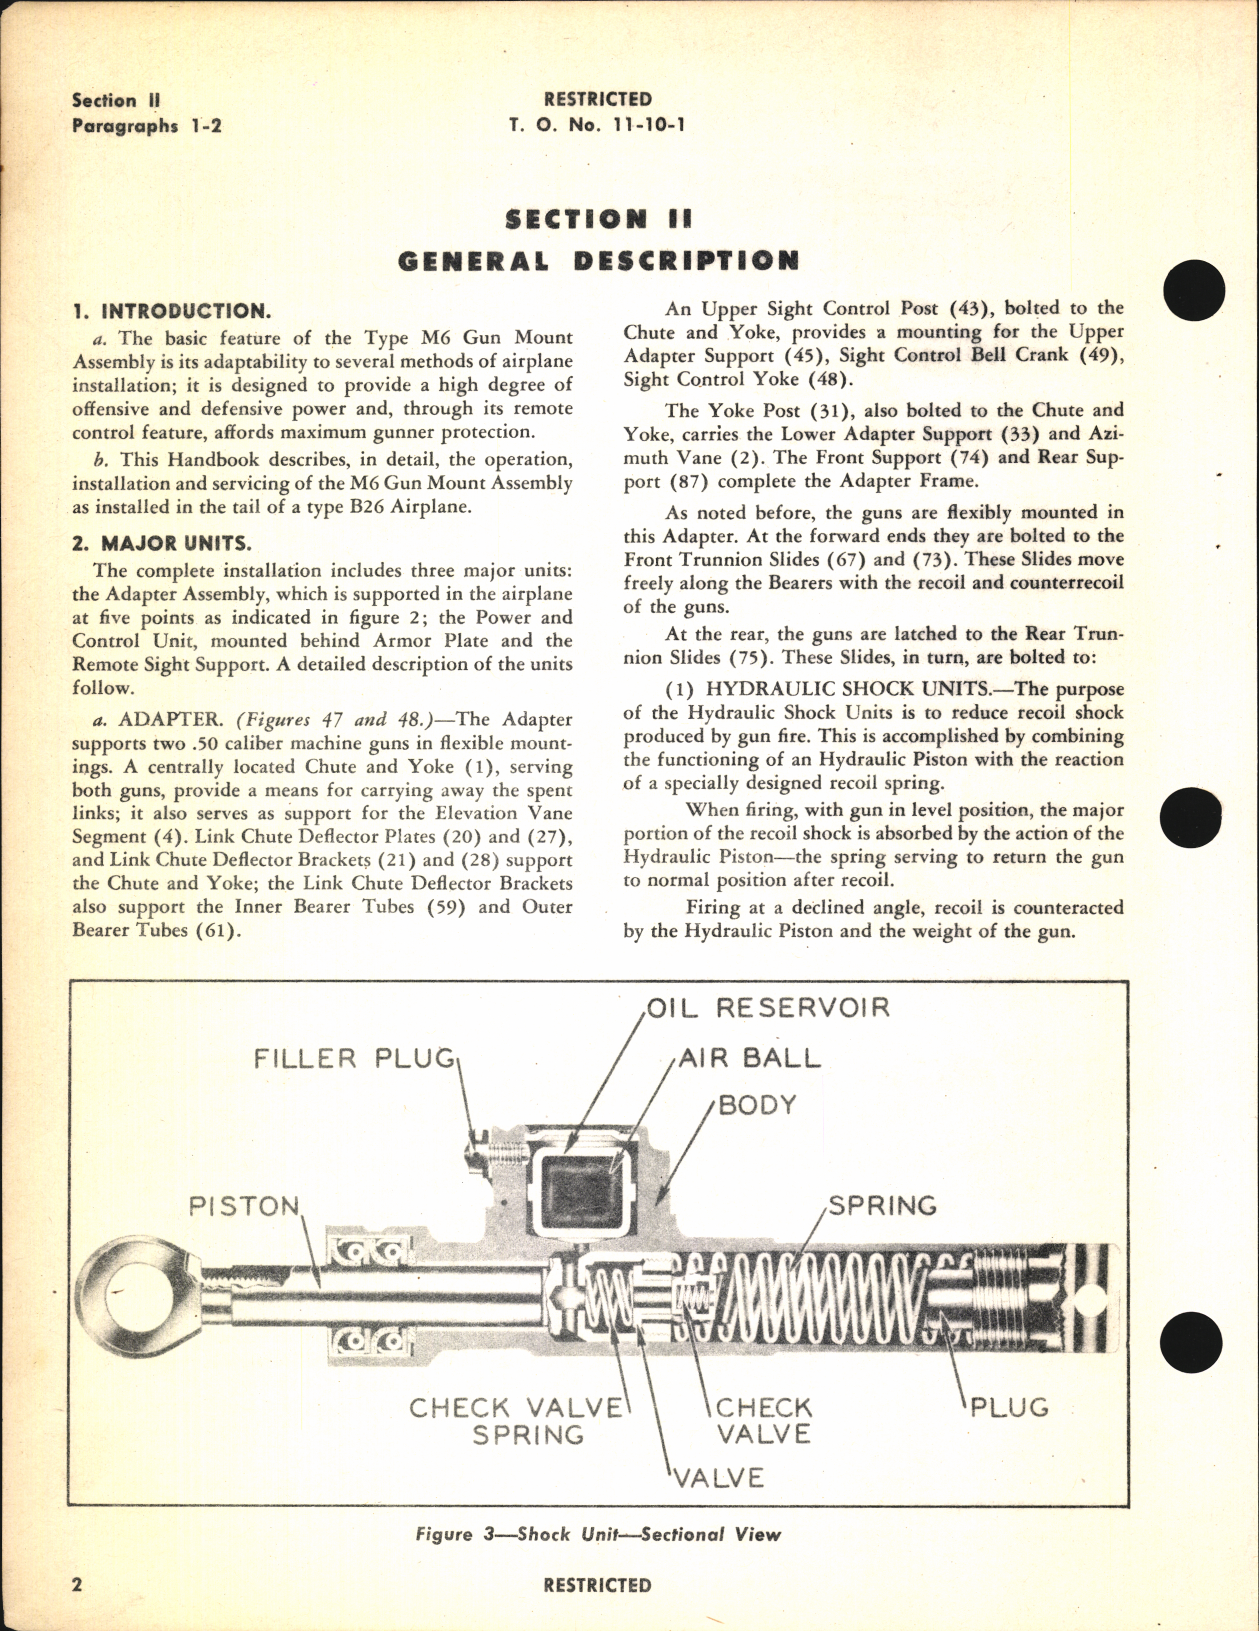 Sample page 6 from AirCorps Library document: Handbook of Instructions with Parts Catalog for Type M-6 Gun Mount Assembly